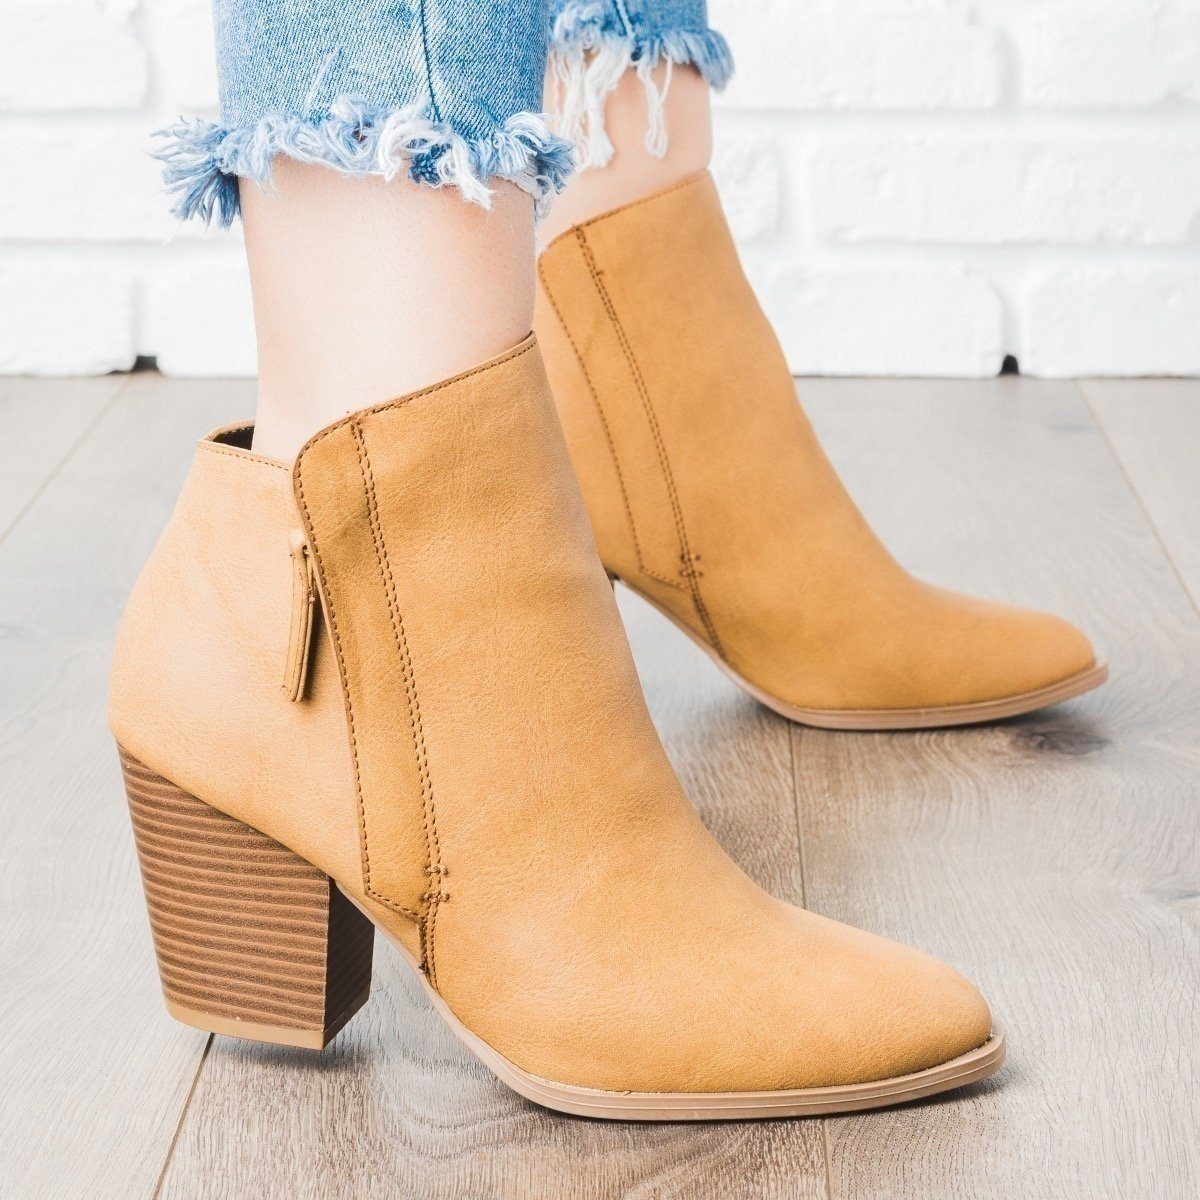 Chic Chunky Heel Ankle Booties